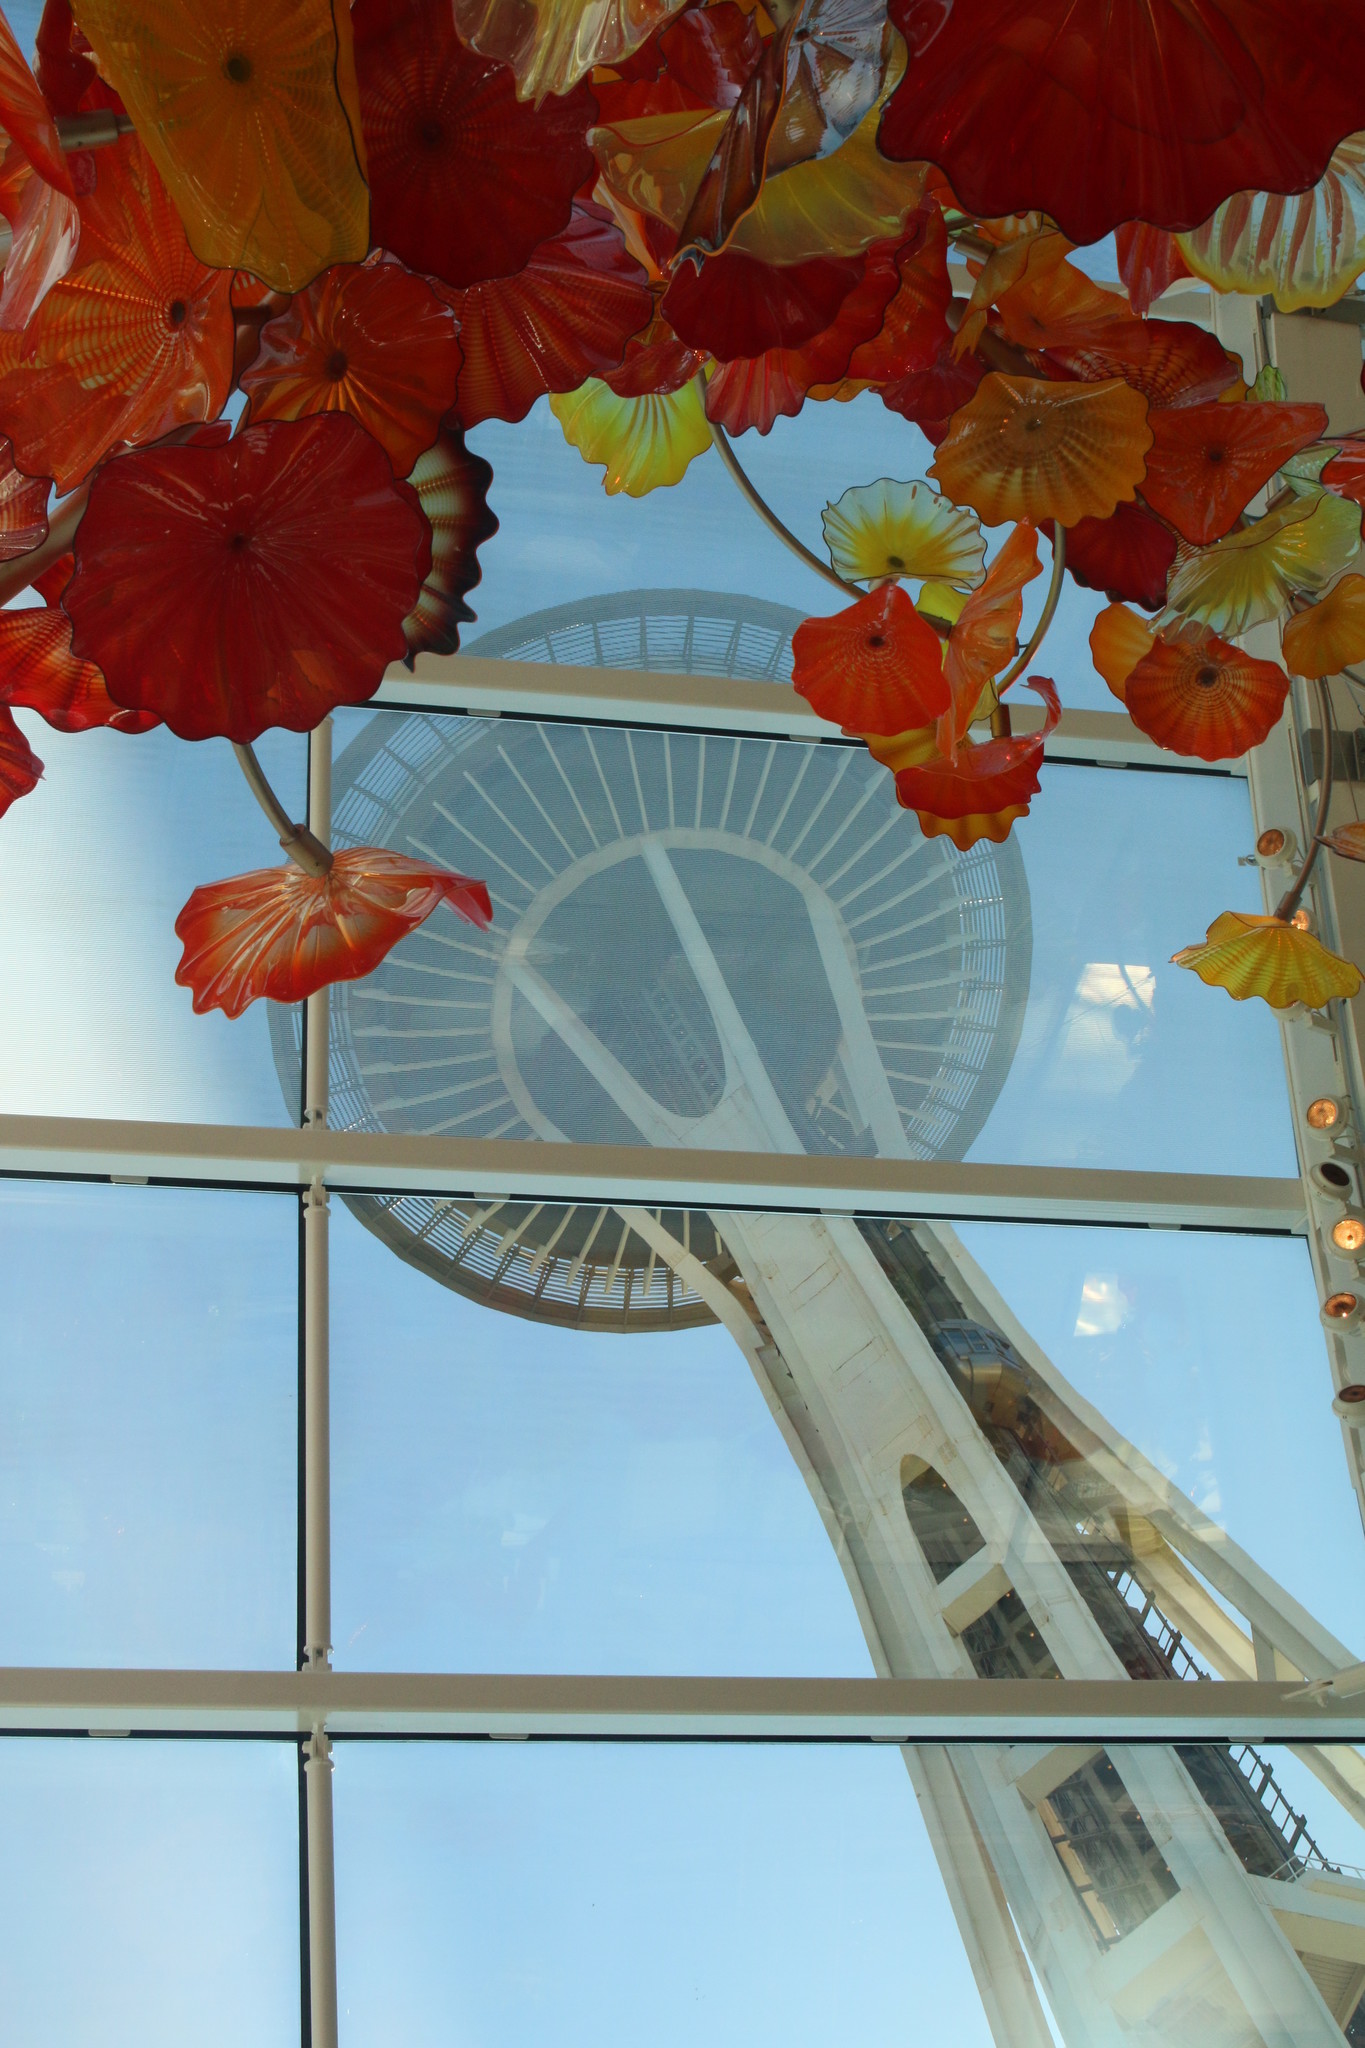 Chihuly Glass House and Gardens near the Space Needle in Seattle.